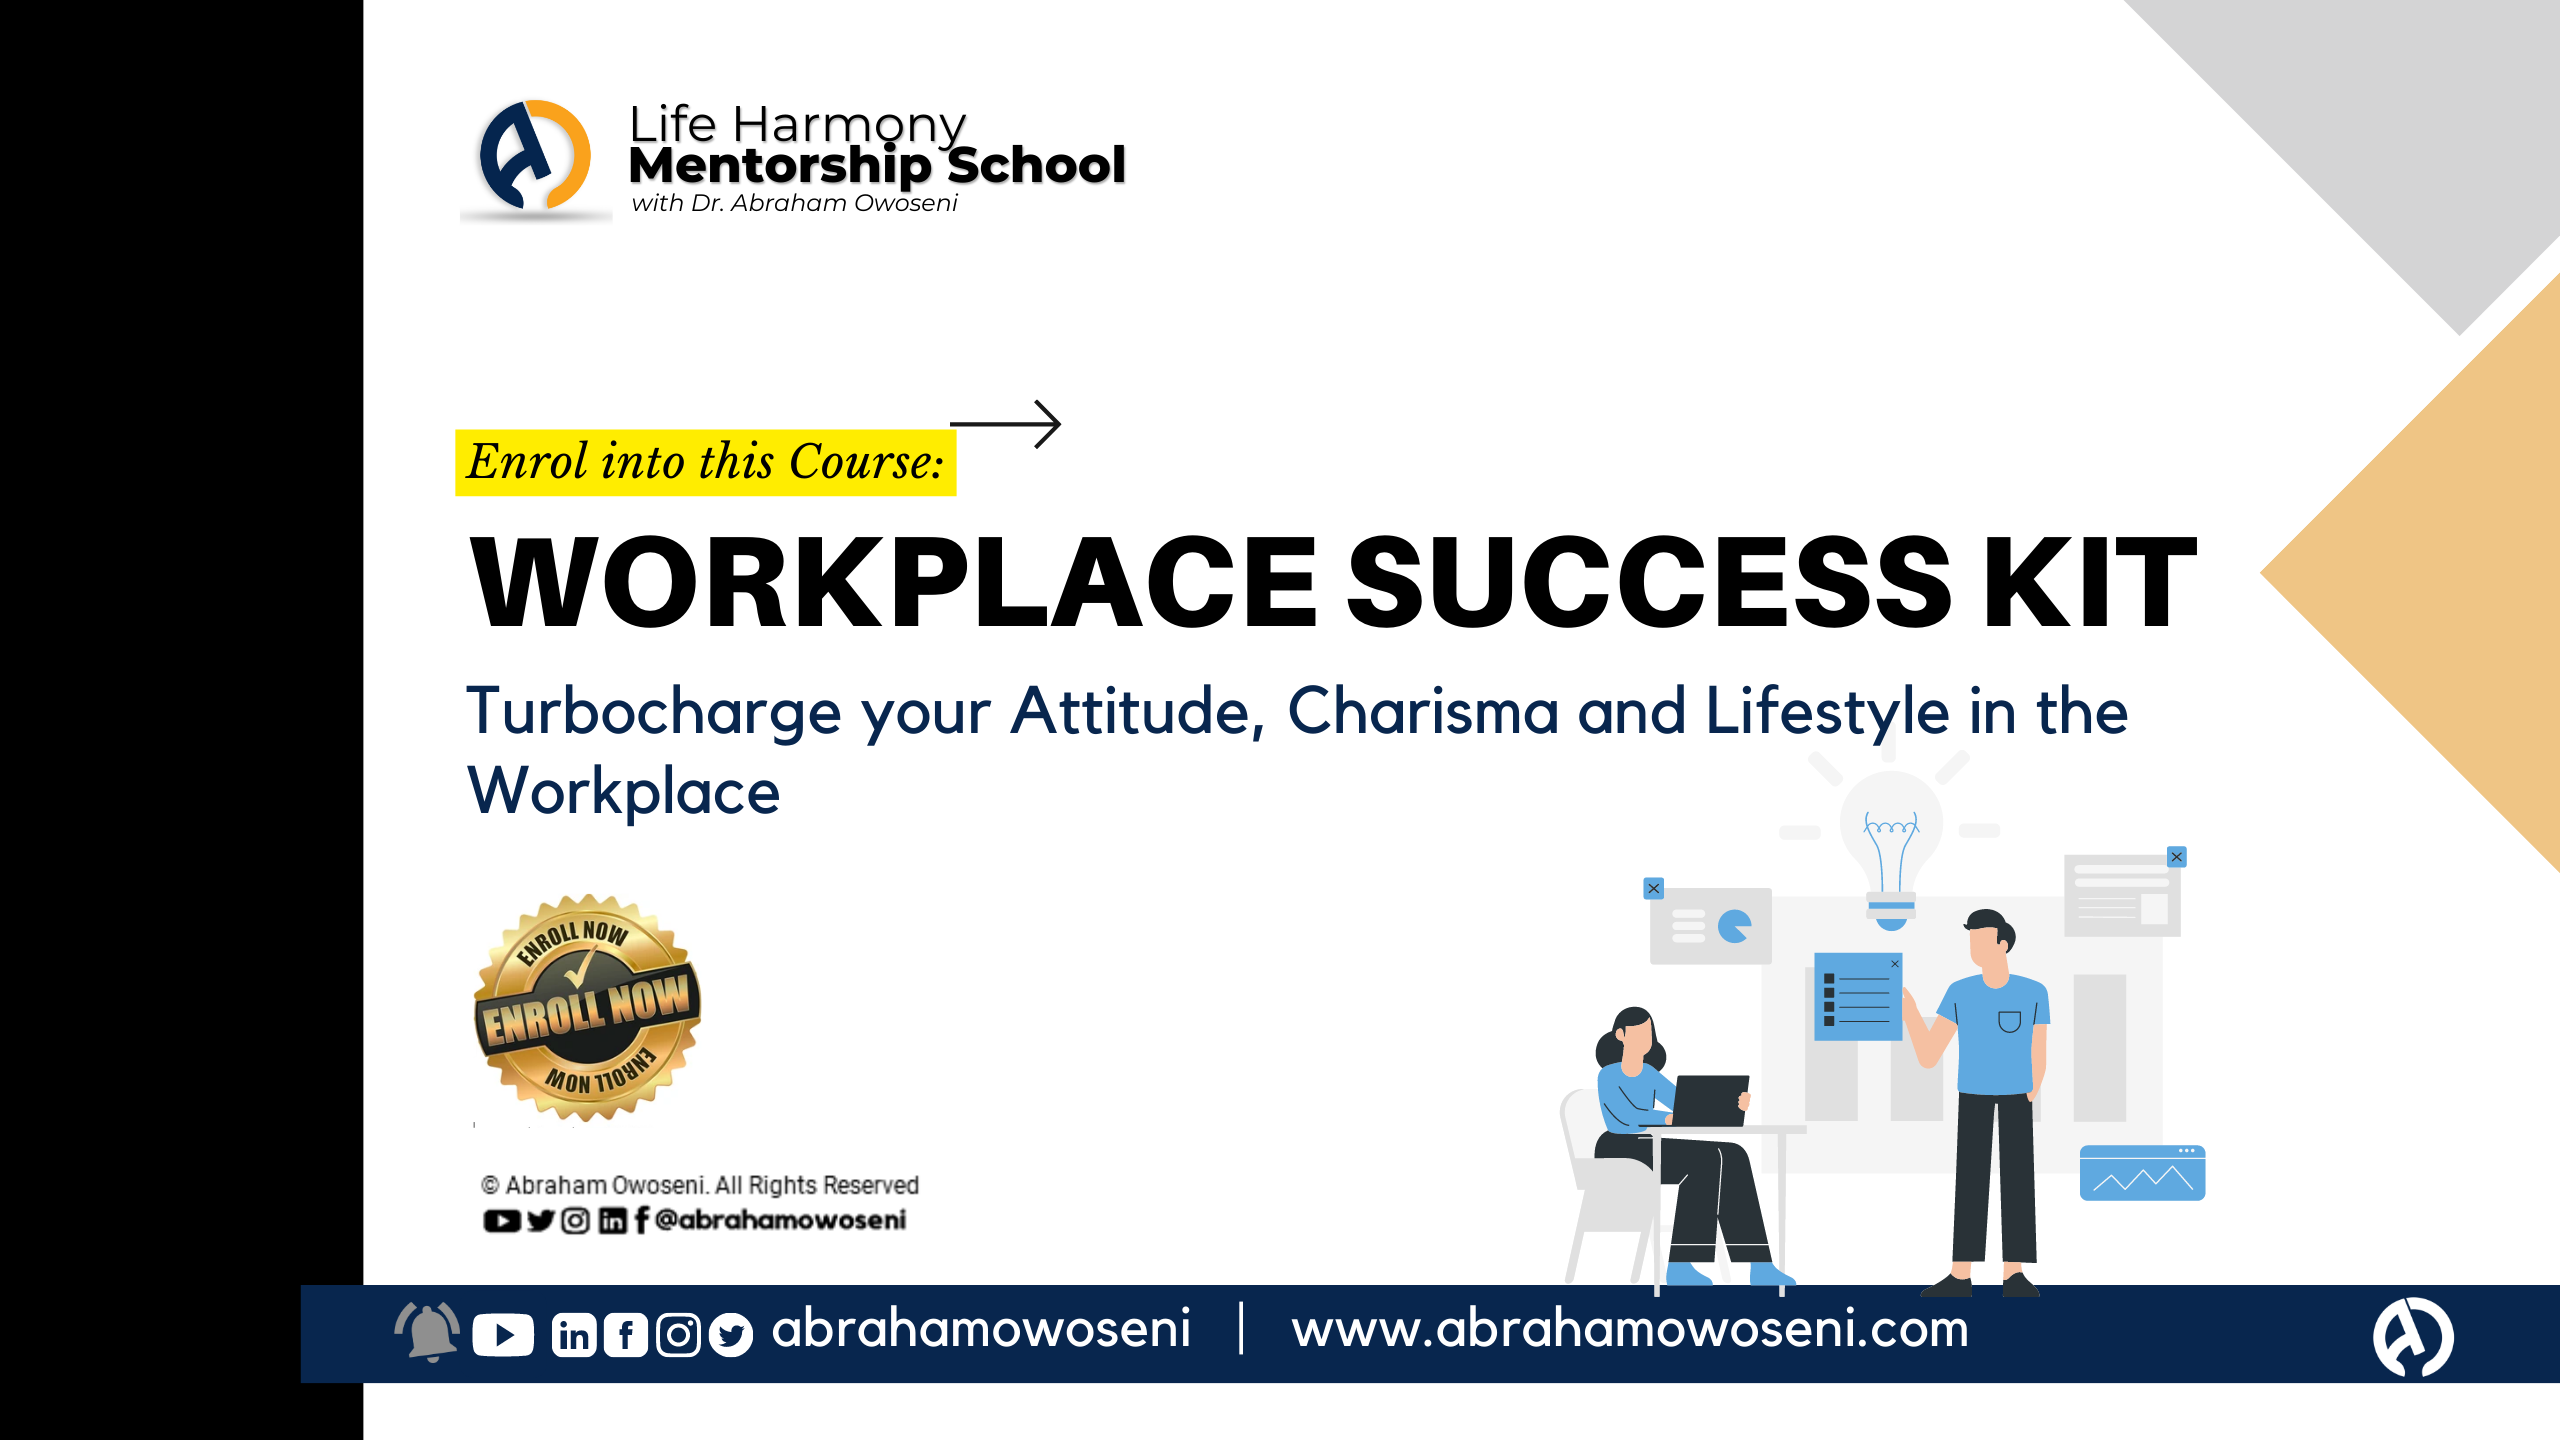 Workplace Success Kit: Core Skills to Turbocharge your Attitude, Charisma and Lifestyle in the Workplace